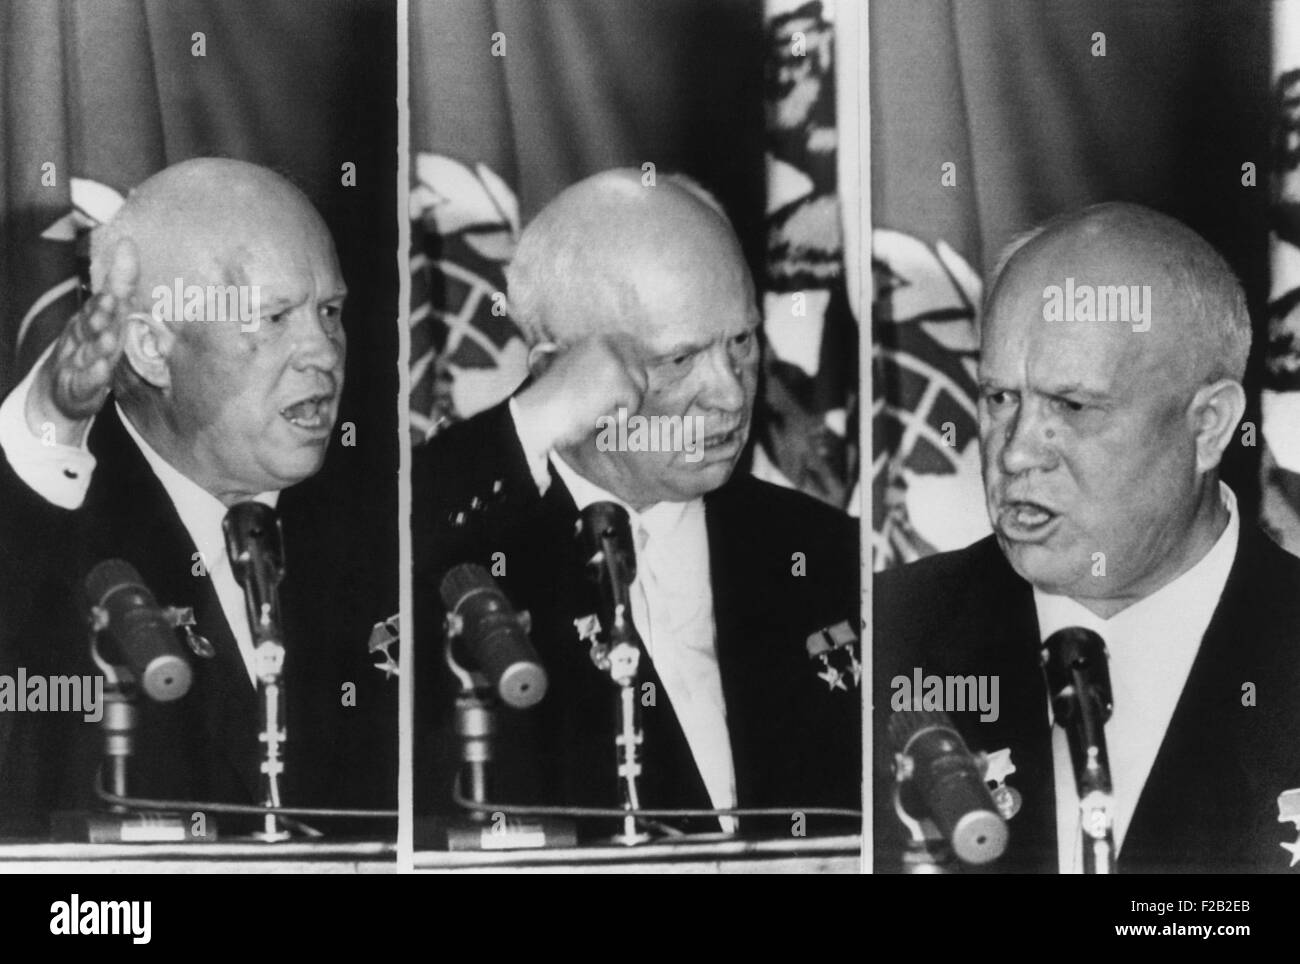 Soviet Premier Nikita Khrushchev gestures as he reacts to L.A. Mayor Norris Poulson remarks. At the banquet given by the Los Angeles World Affairs Council, Poulson undiplomatically referred to Khrushchev's unfortunate 1956, 'We will bury you' remark. (CSU 2015 8 551) Stock Photo